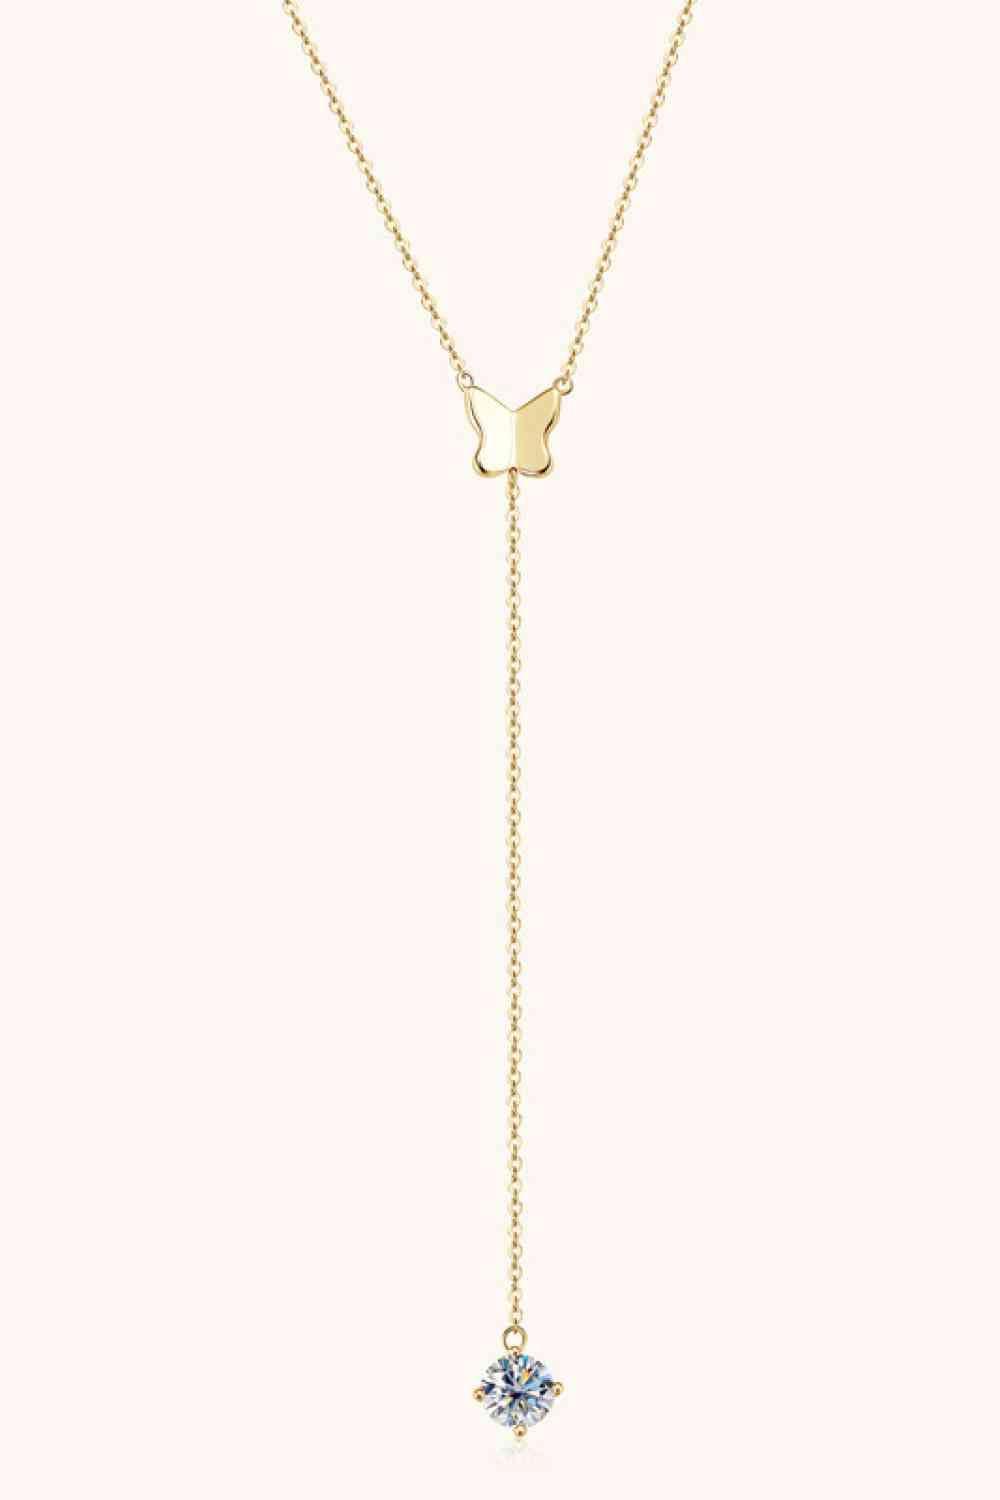 a gold necklace with a white diamond on a chain